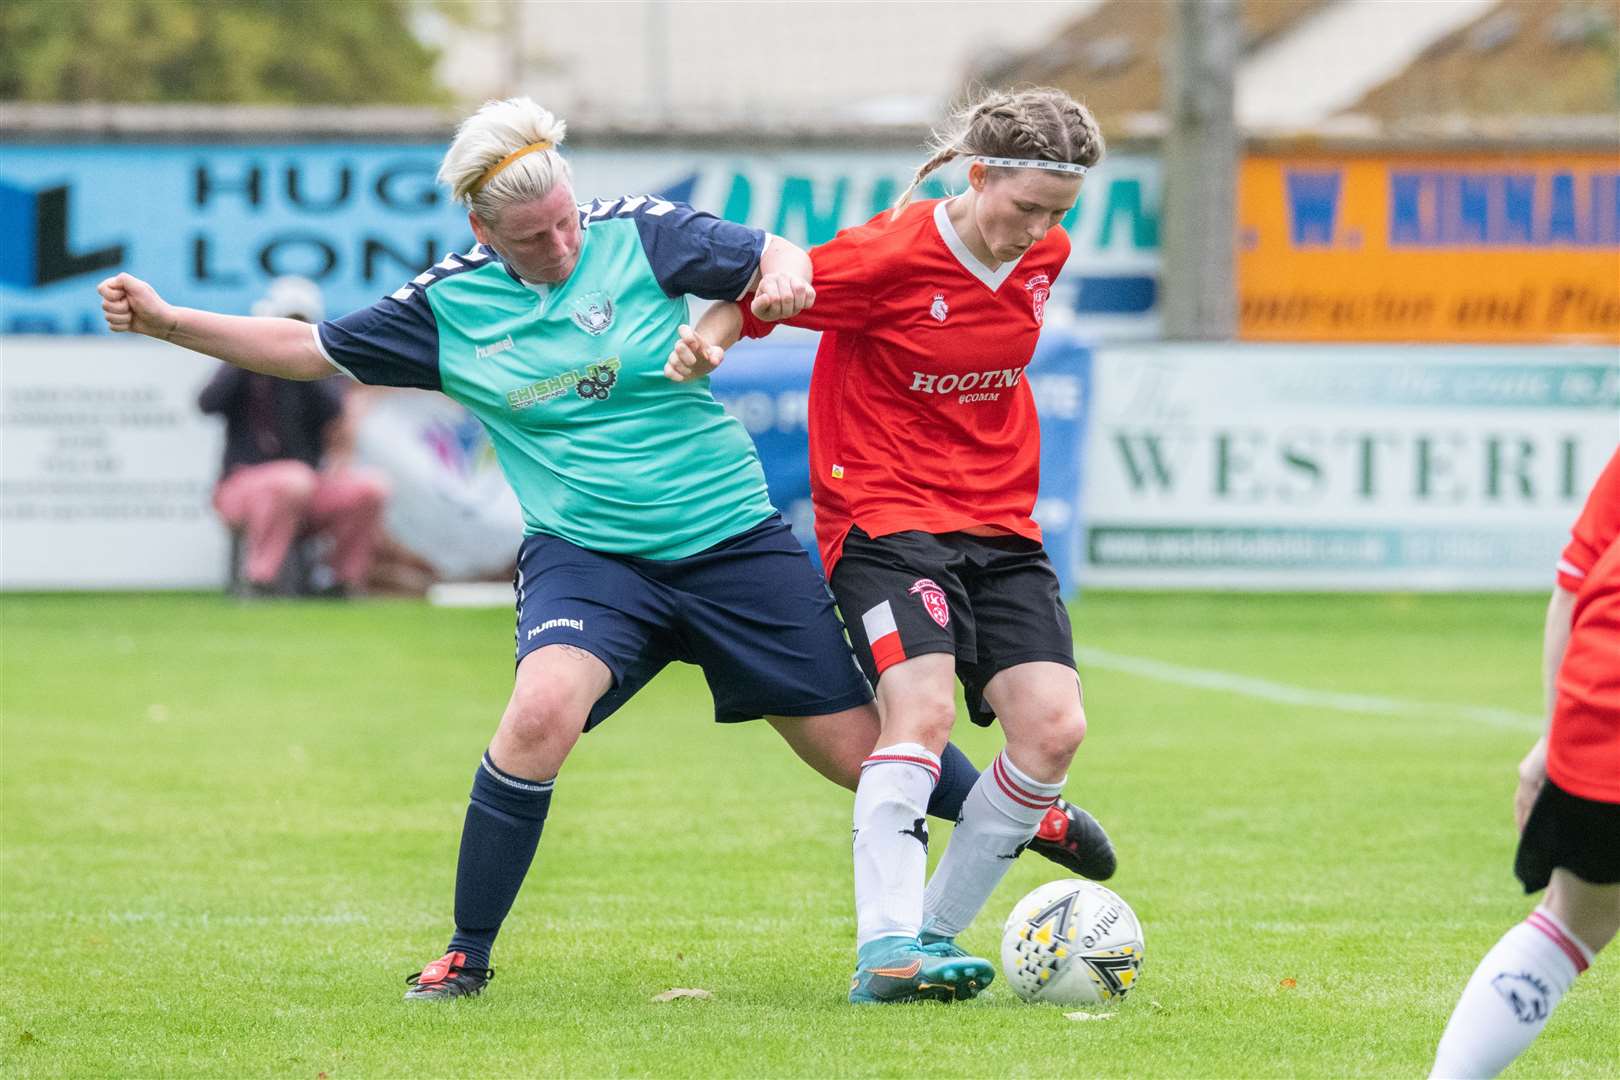 Buckie's Alicia Paterson tries to win the ball away from Caithness' Carly Erridge. ..Buckie Ladies (3) vs Caithness Ladies (1) - SWF Highlands & Islands League Cup Final 2023 - Station Park, Nairn 24/09/2023...Picture: Daniel Forsyth..